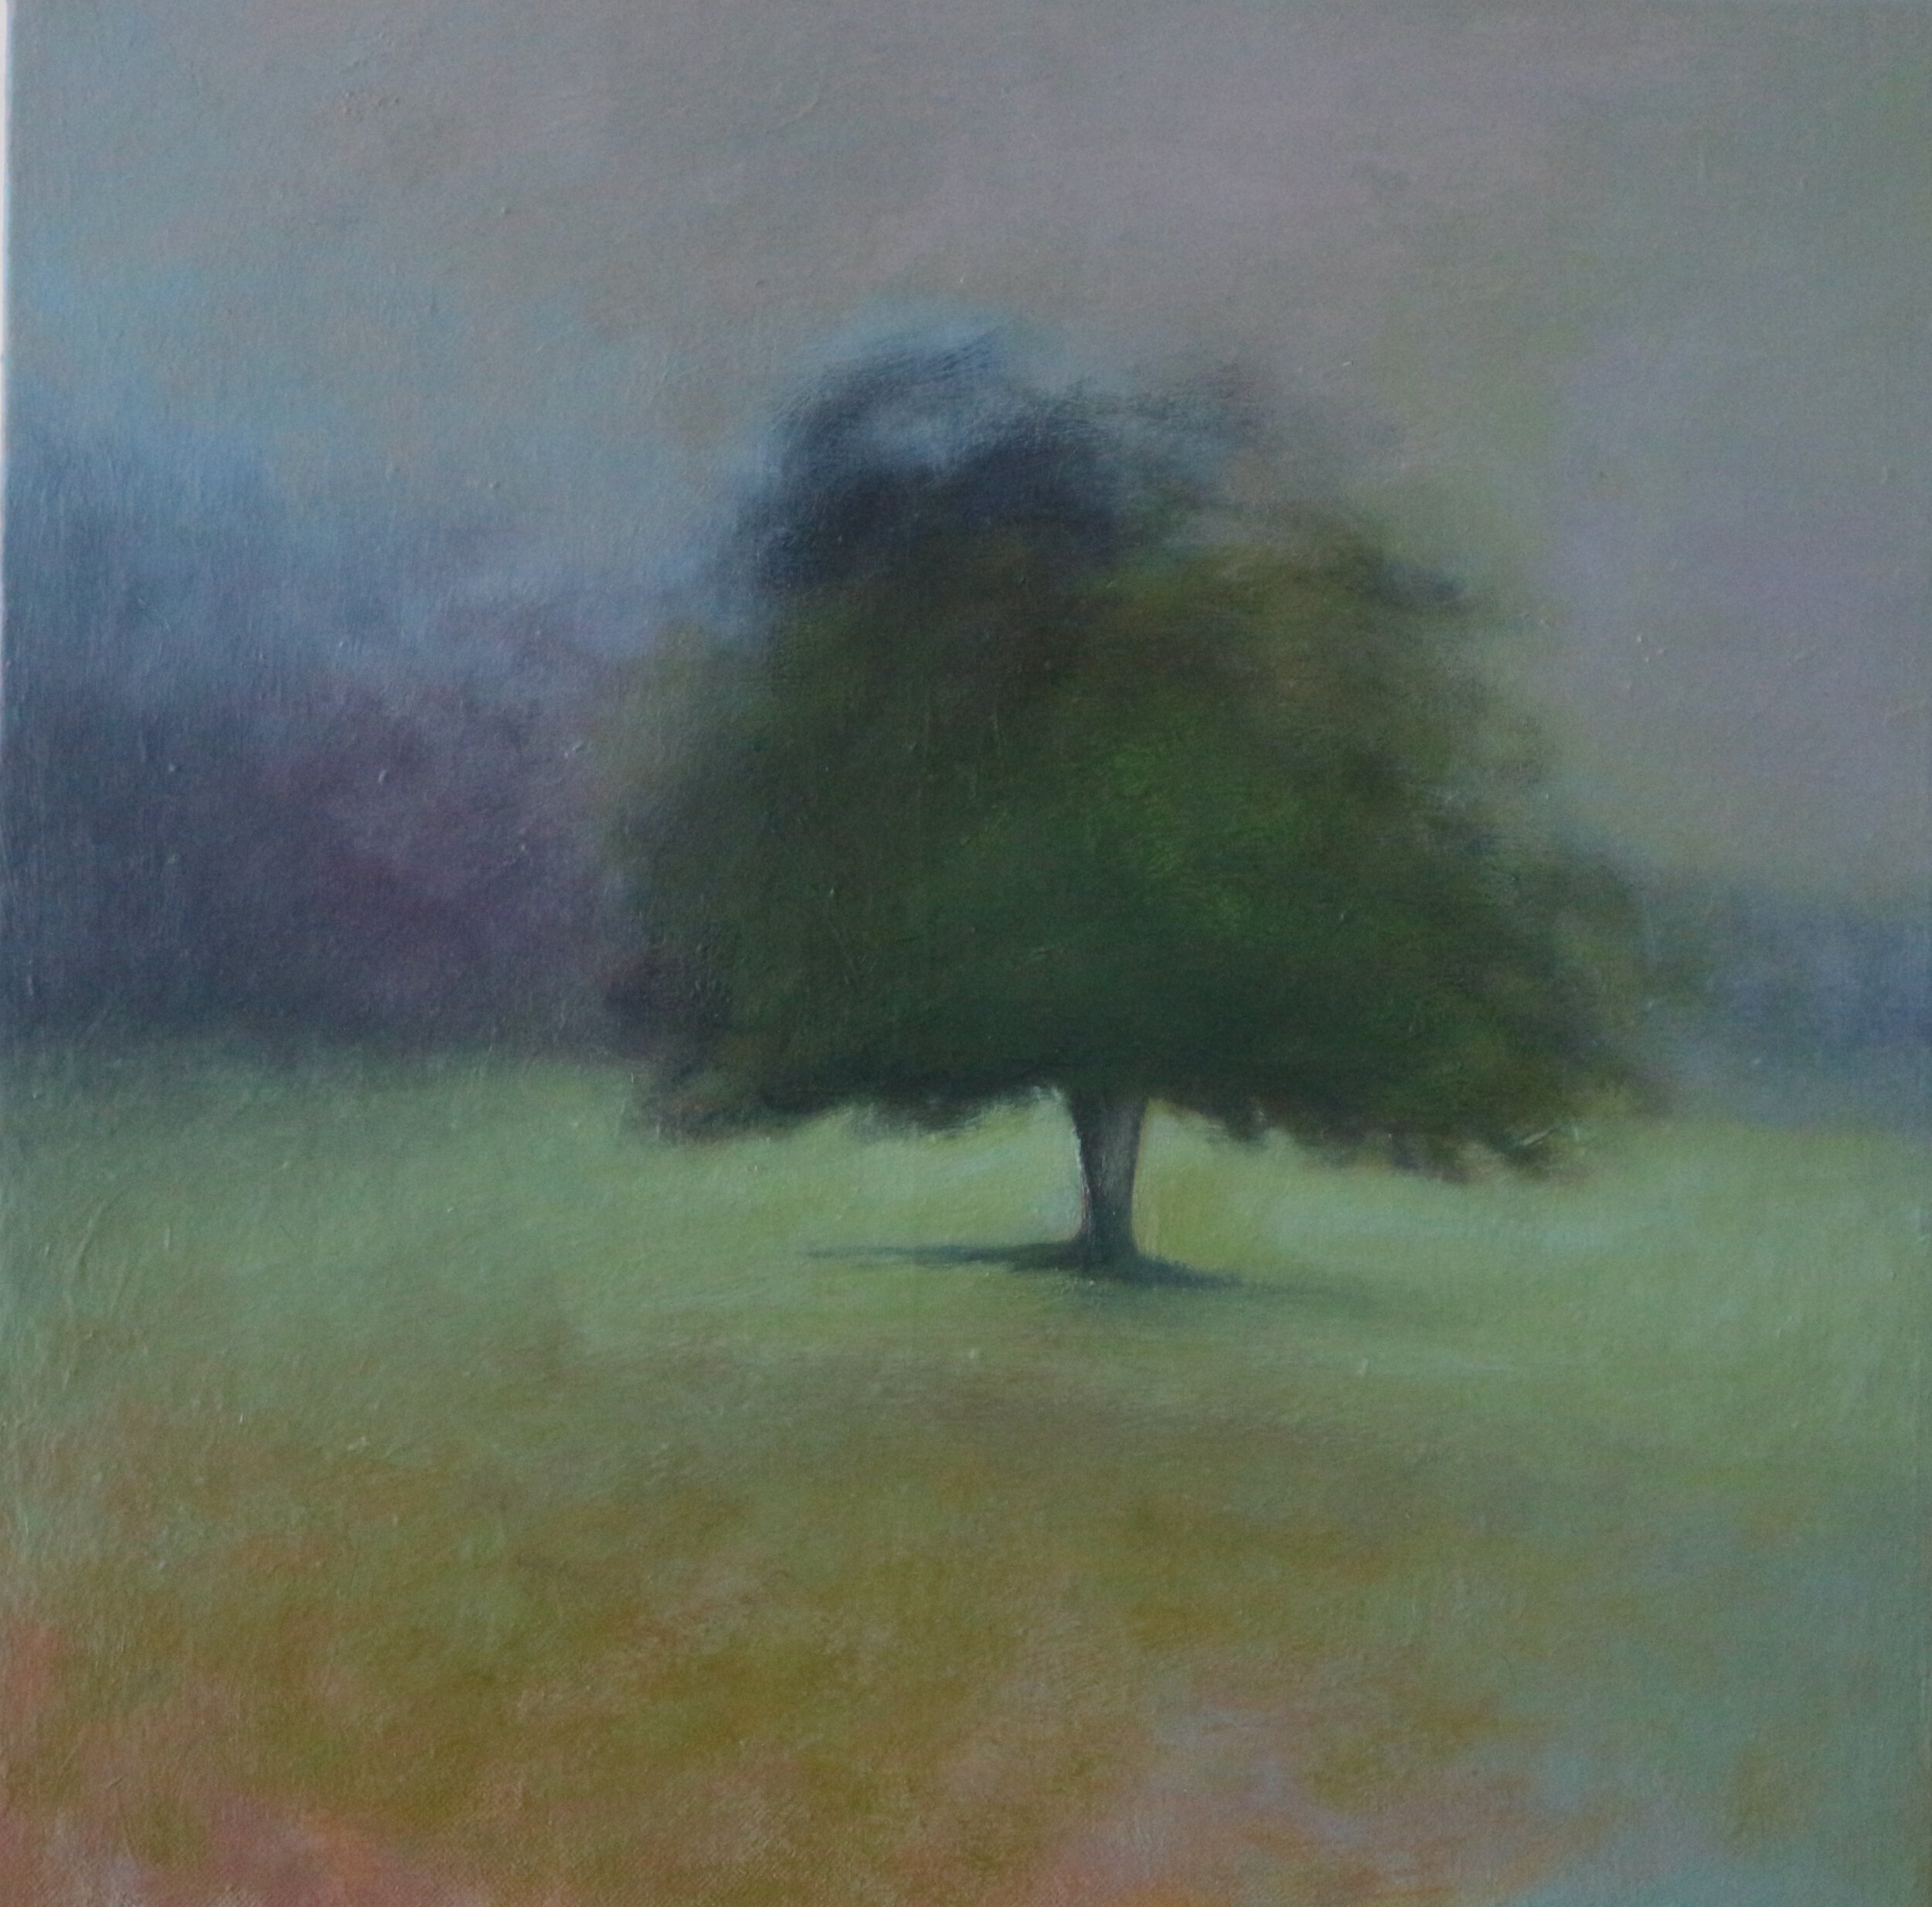  Title: Field Note Medium: oil on canvas Size: 36 x 36 cm  